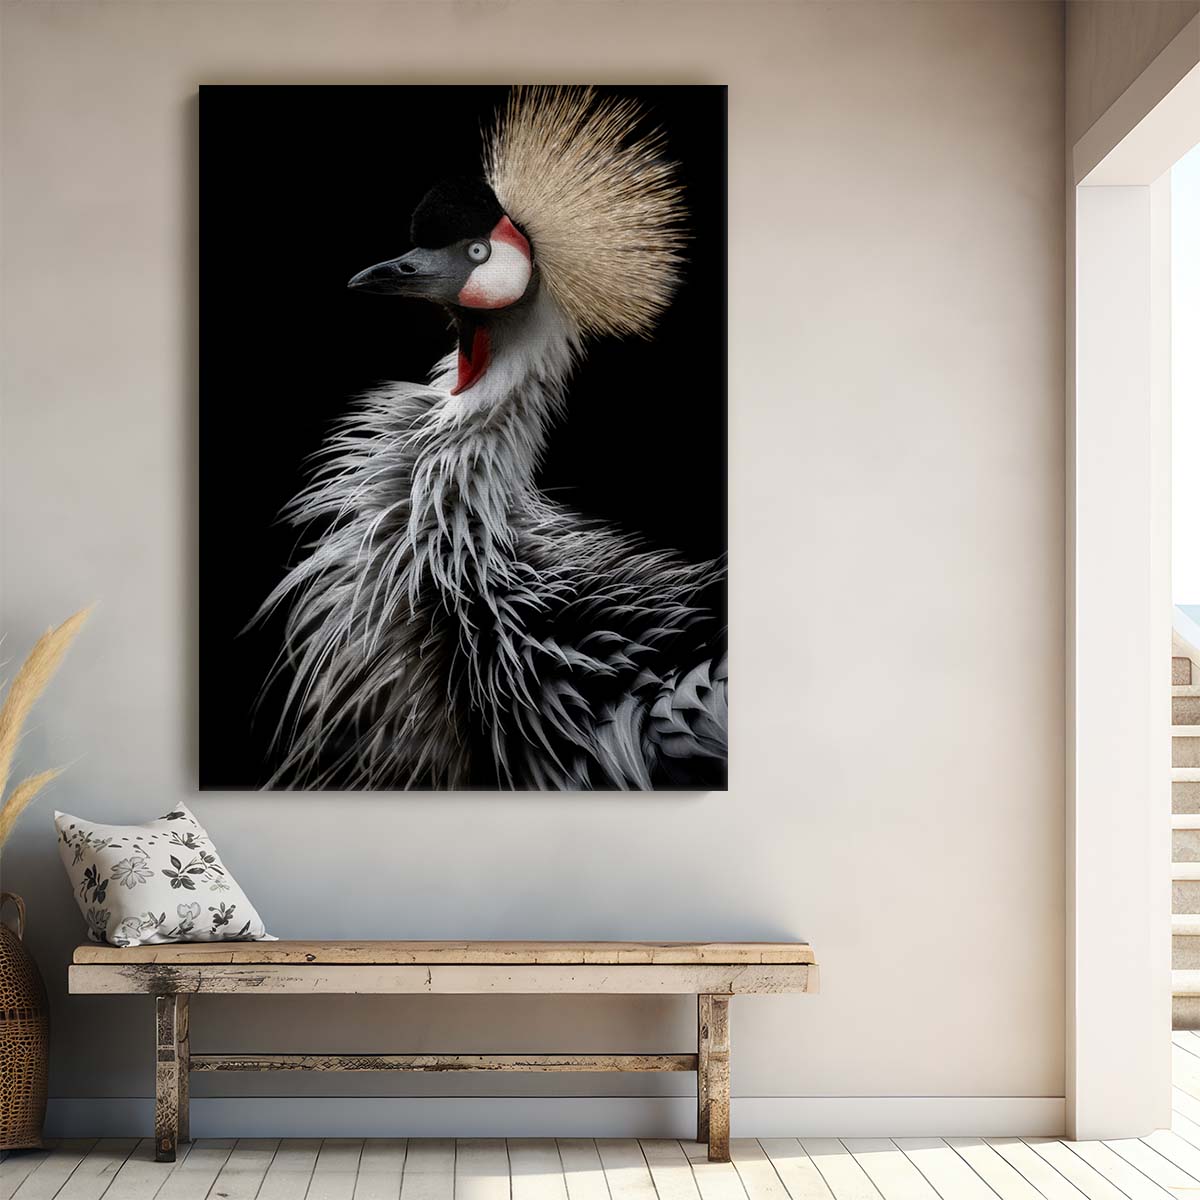 Minimalist Monochrome Crowned Crane Bird Photography Wall Art by Luxuriance Designs, made in USA